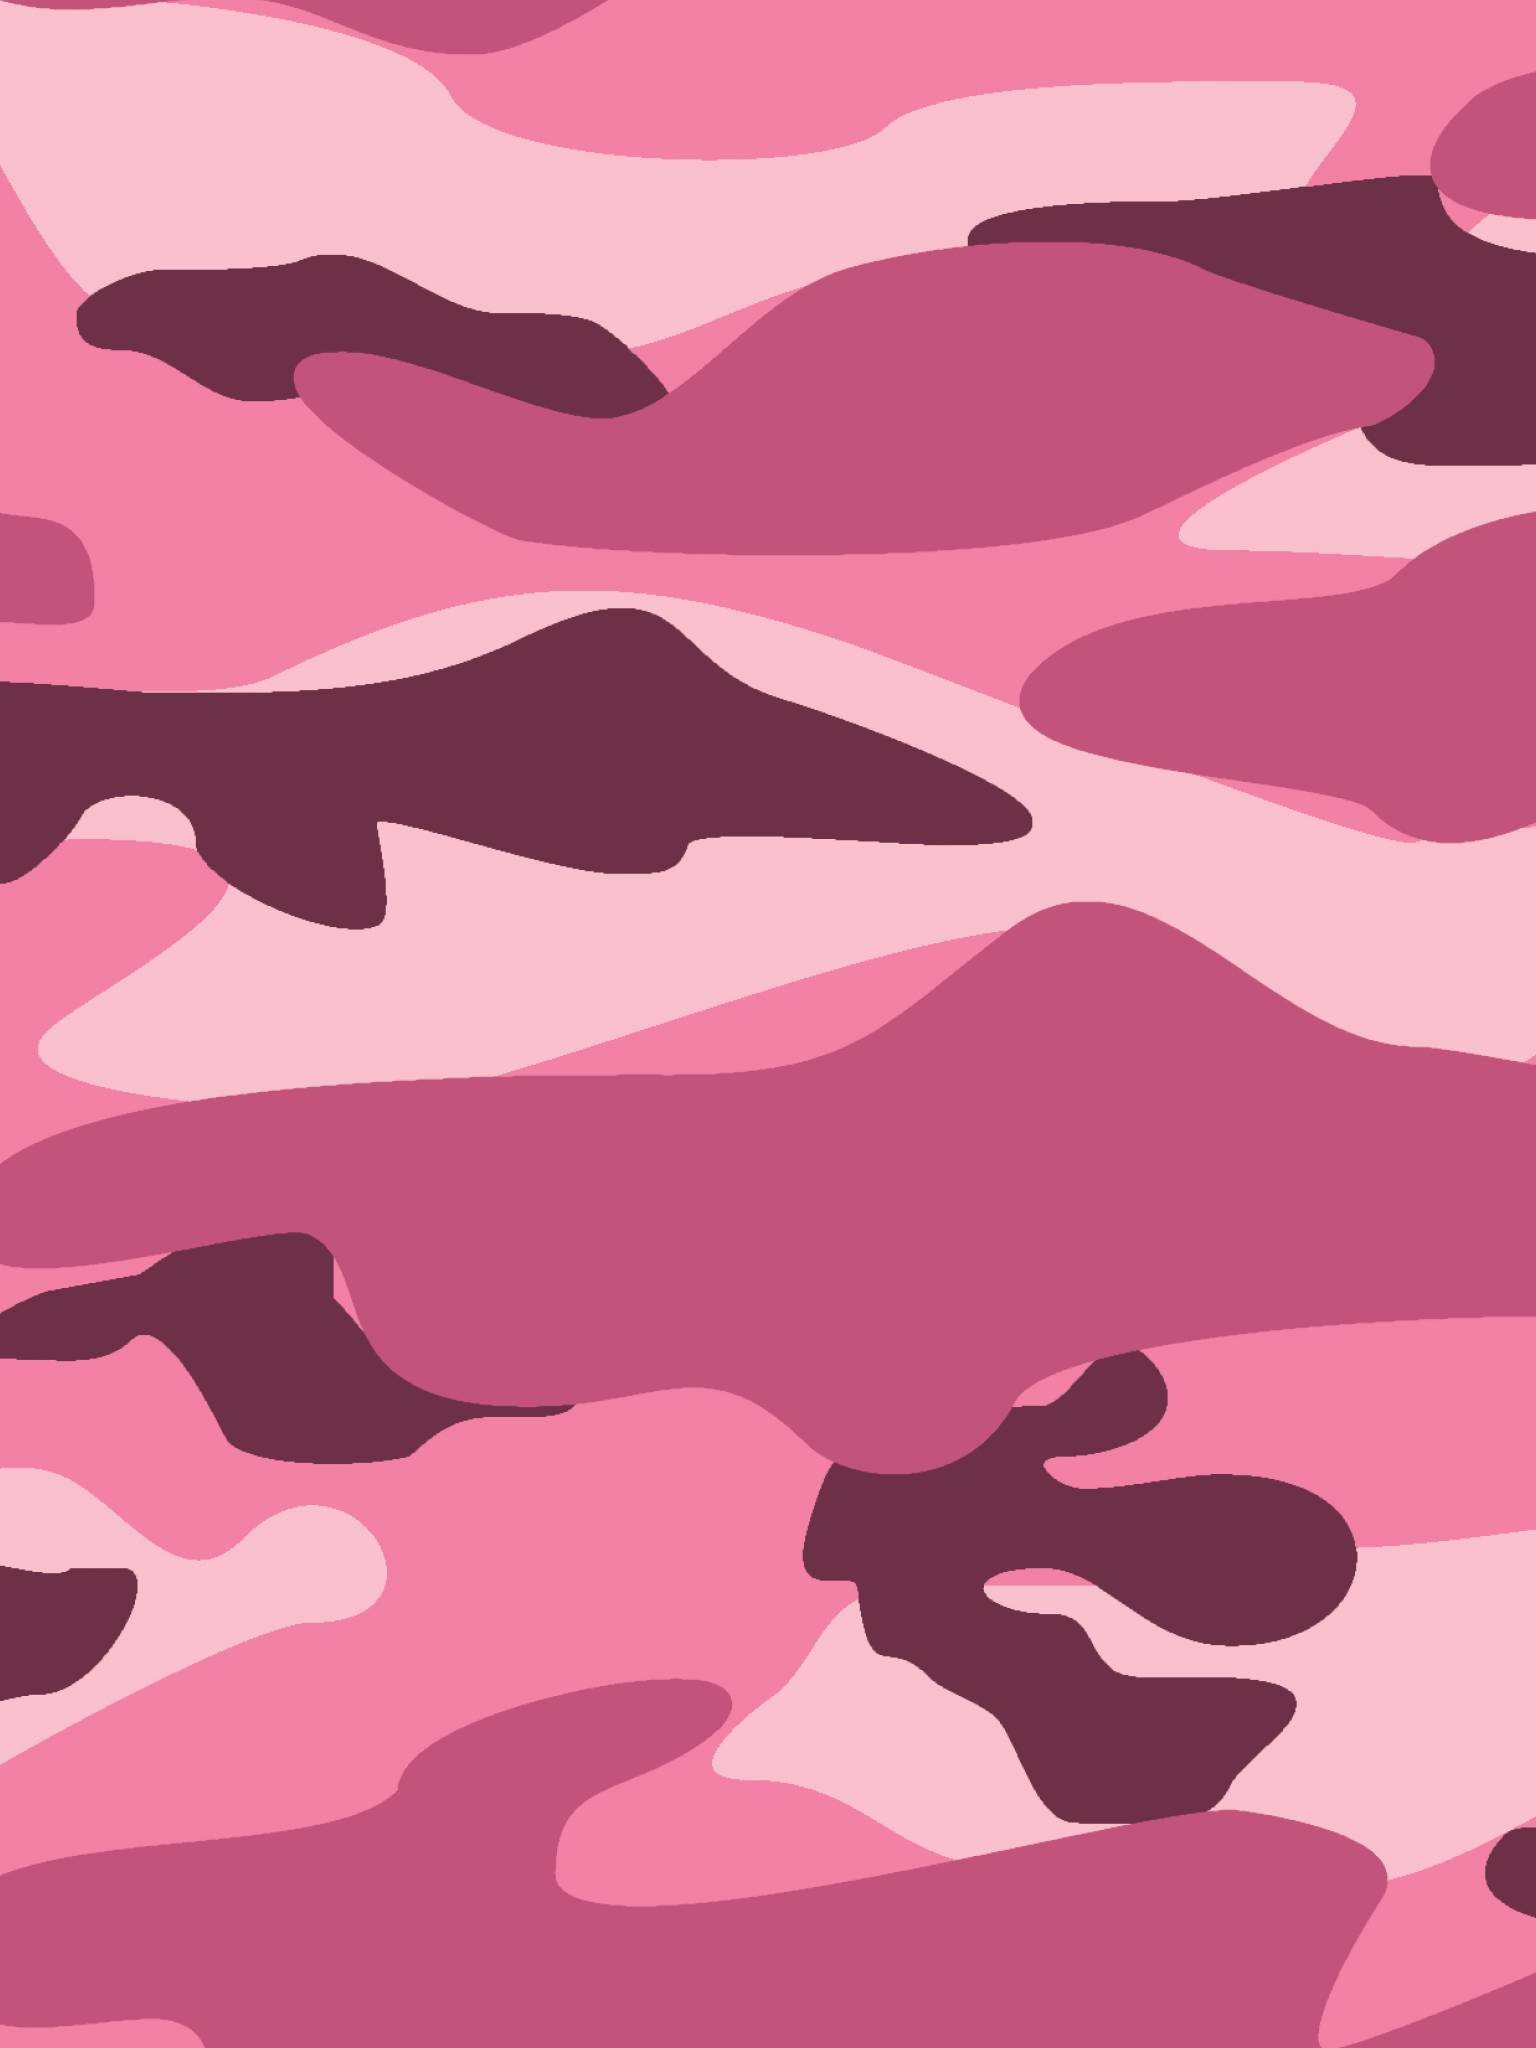 1536x2048 Displaying 16> Images For - Pink Camo Wallpaper For Ipad.